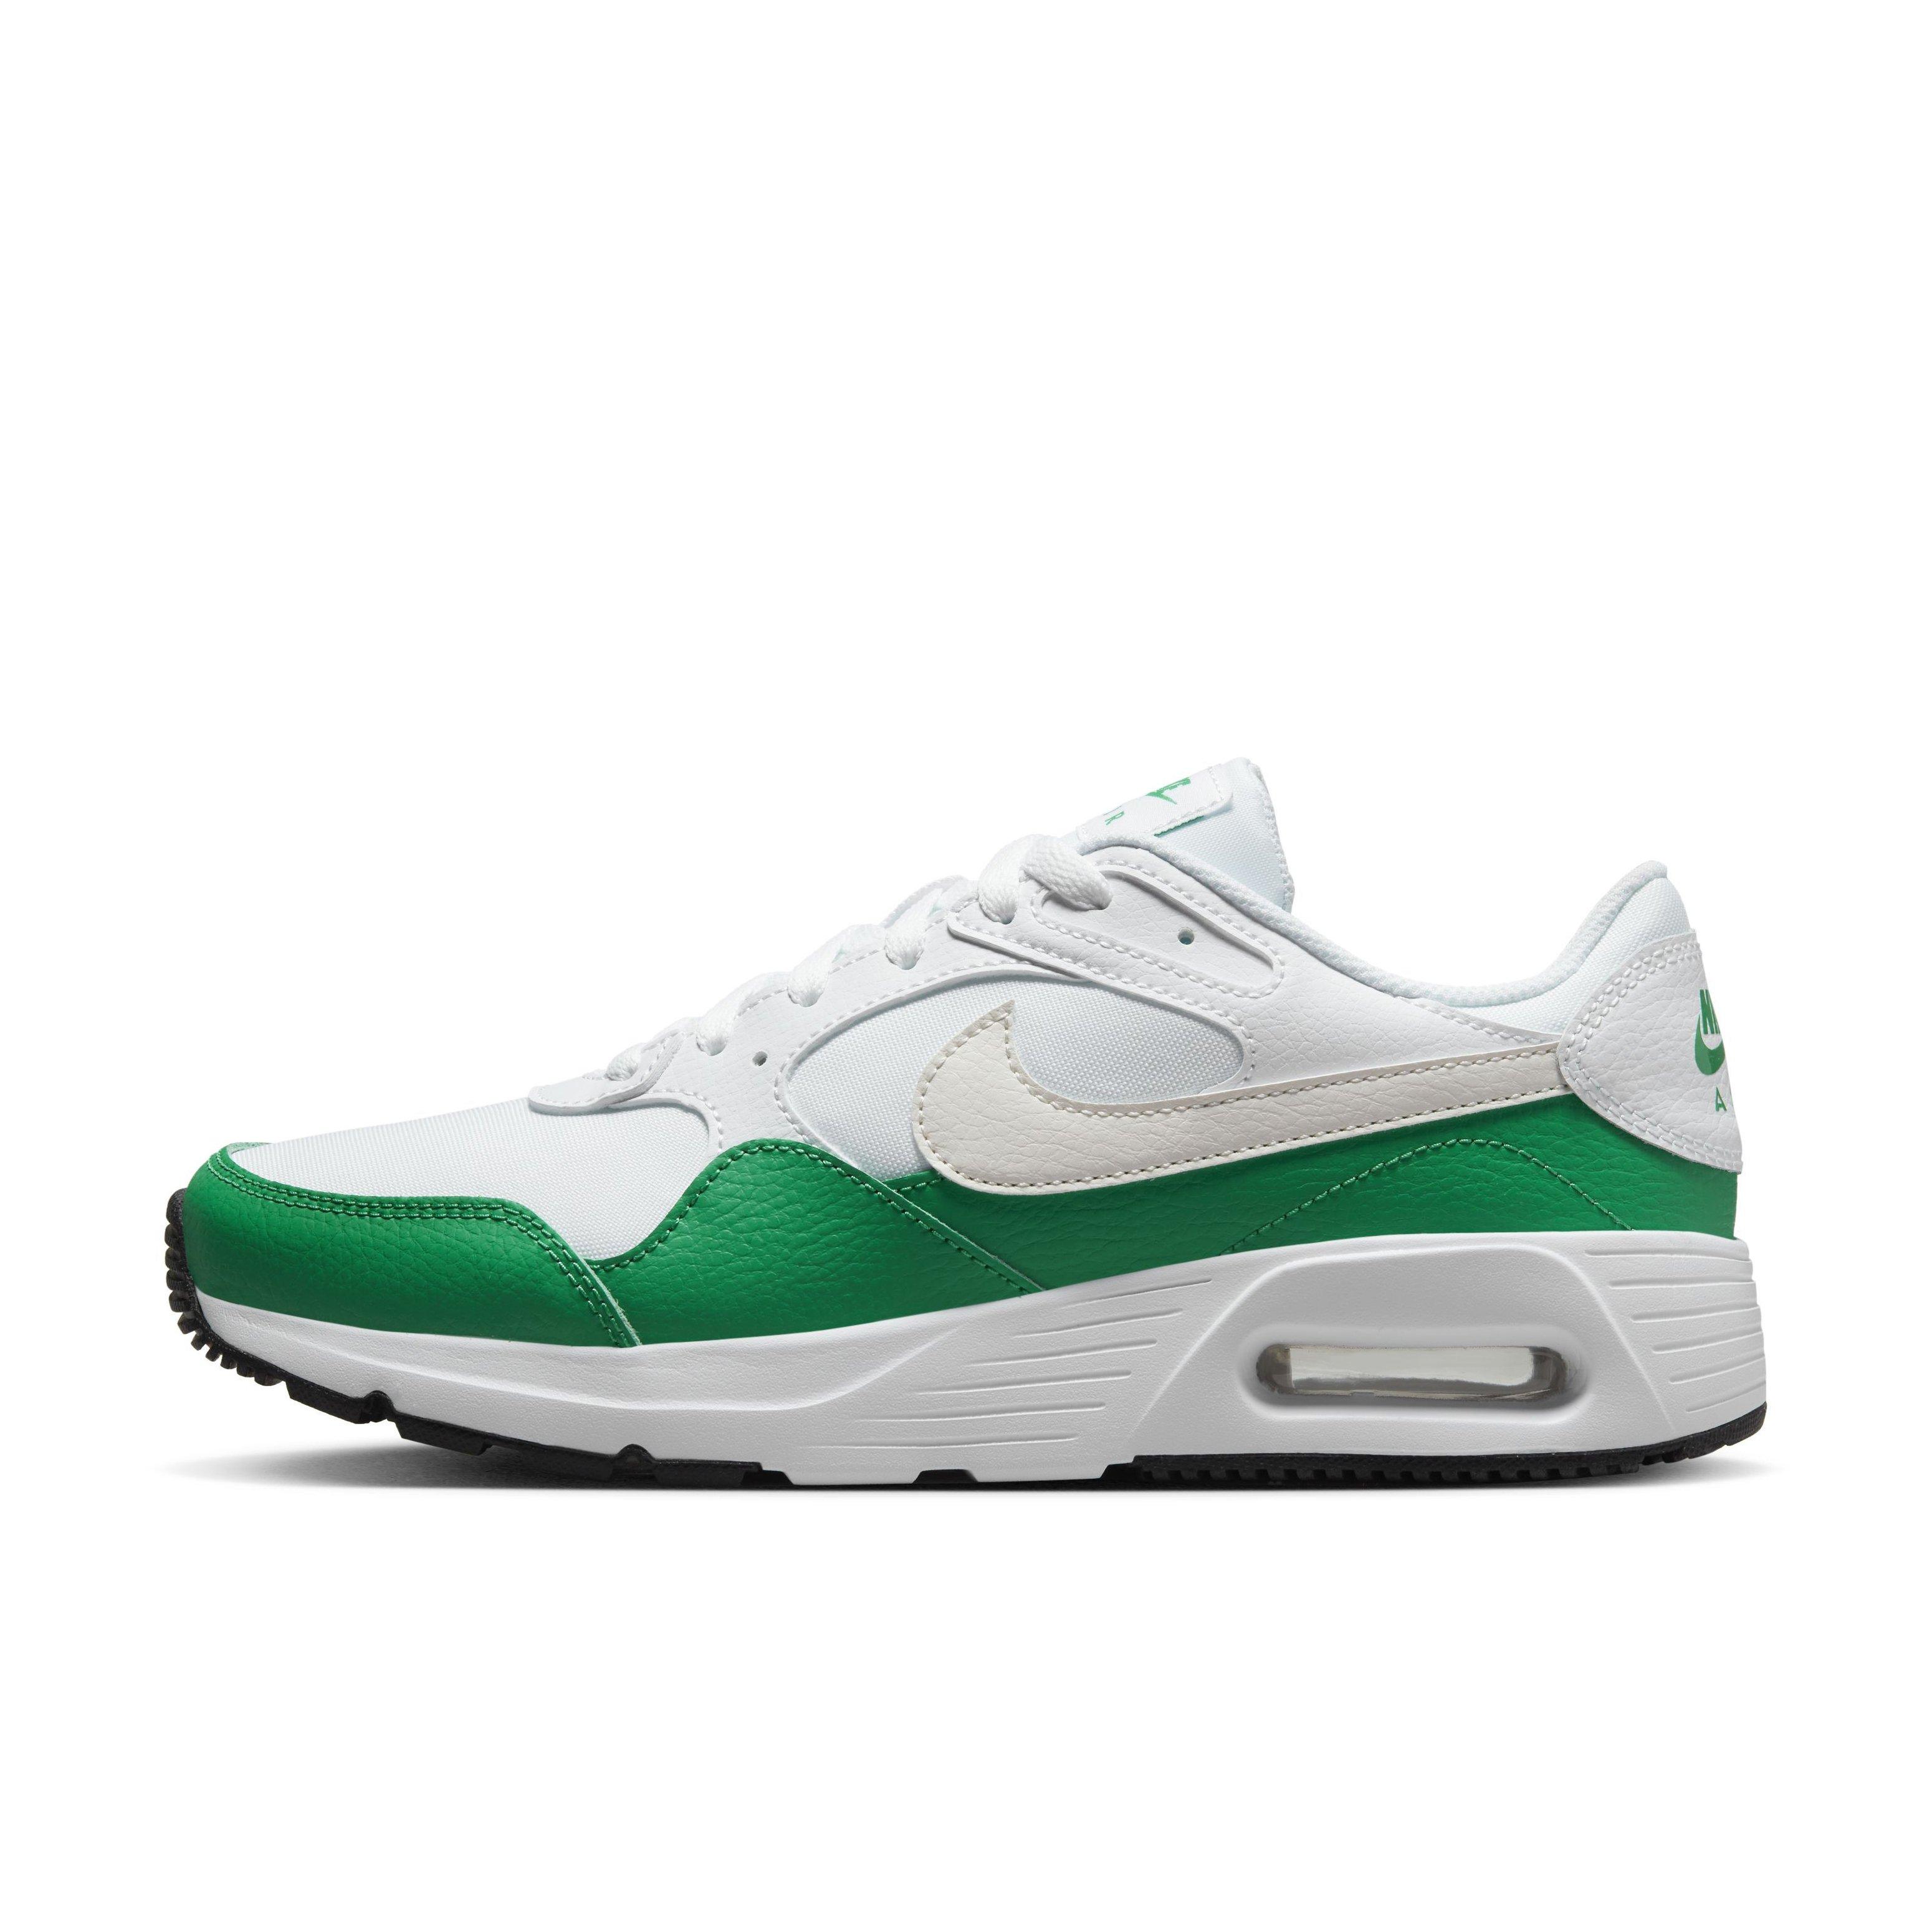 Nike Air Max Green and White: Fresh and Clean Sneakers for Everyday Wear